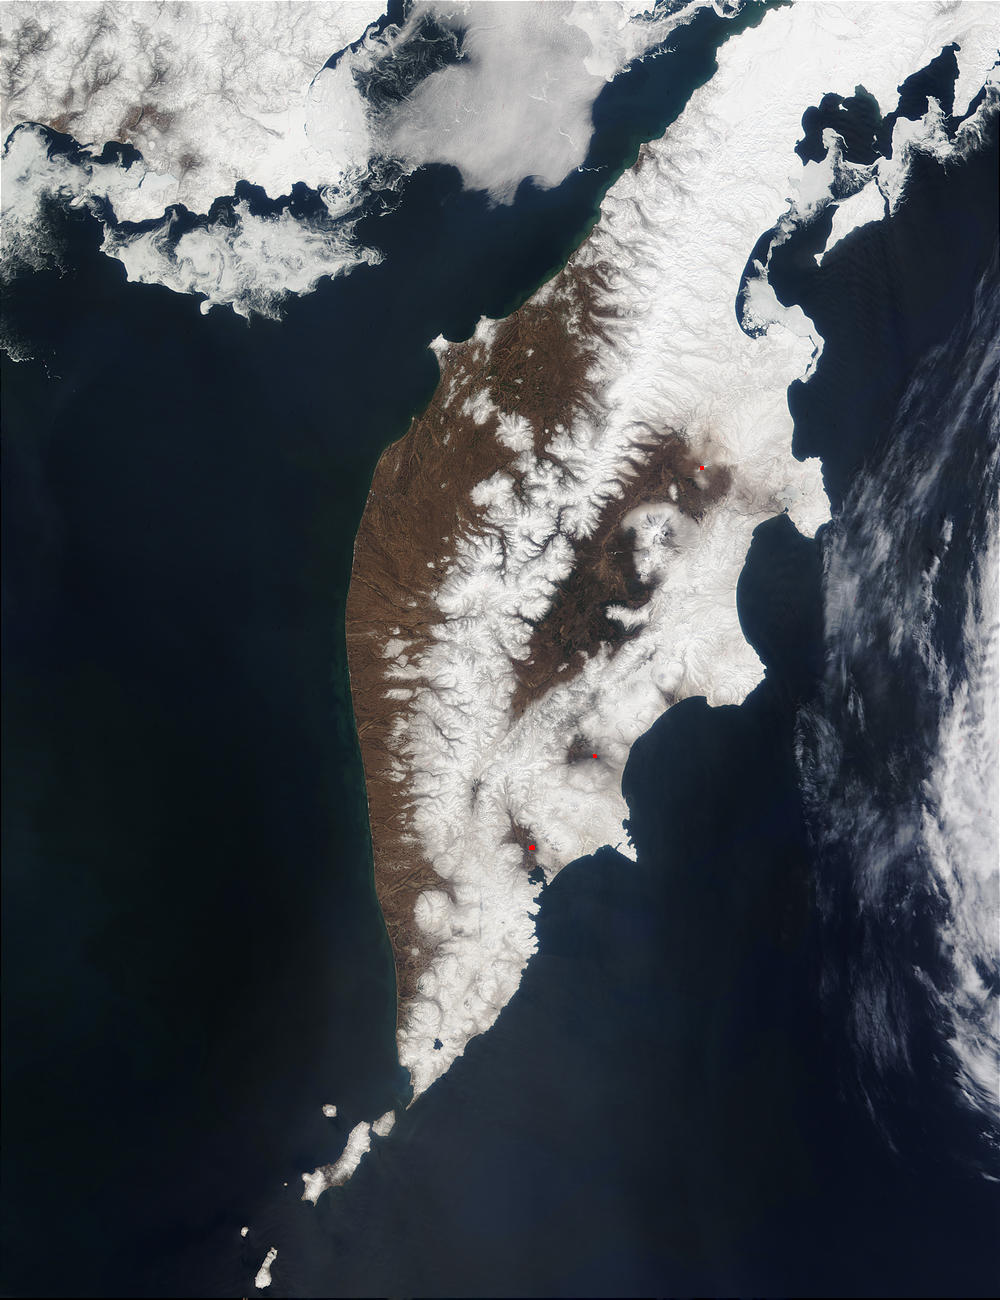 Kamchatka Peninsula, Russia - related image preview